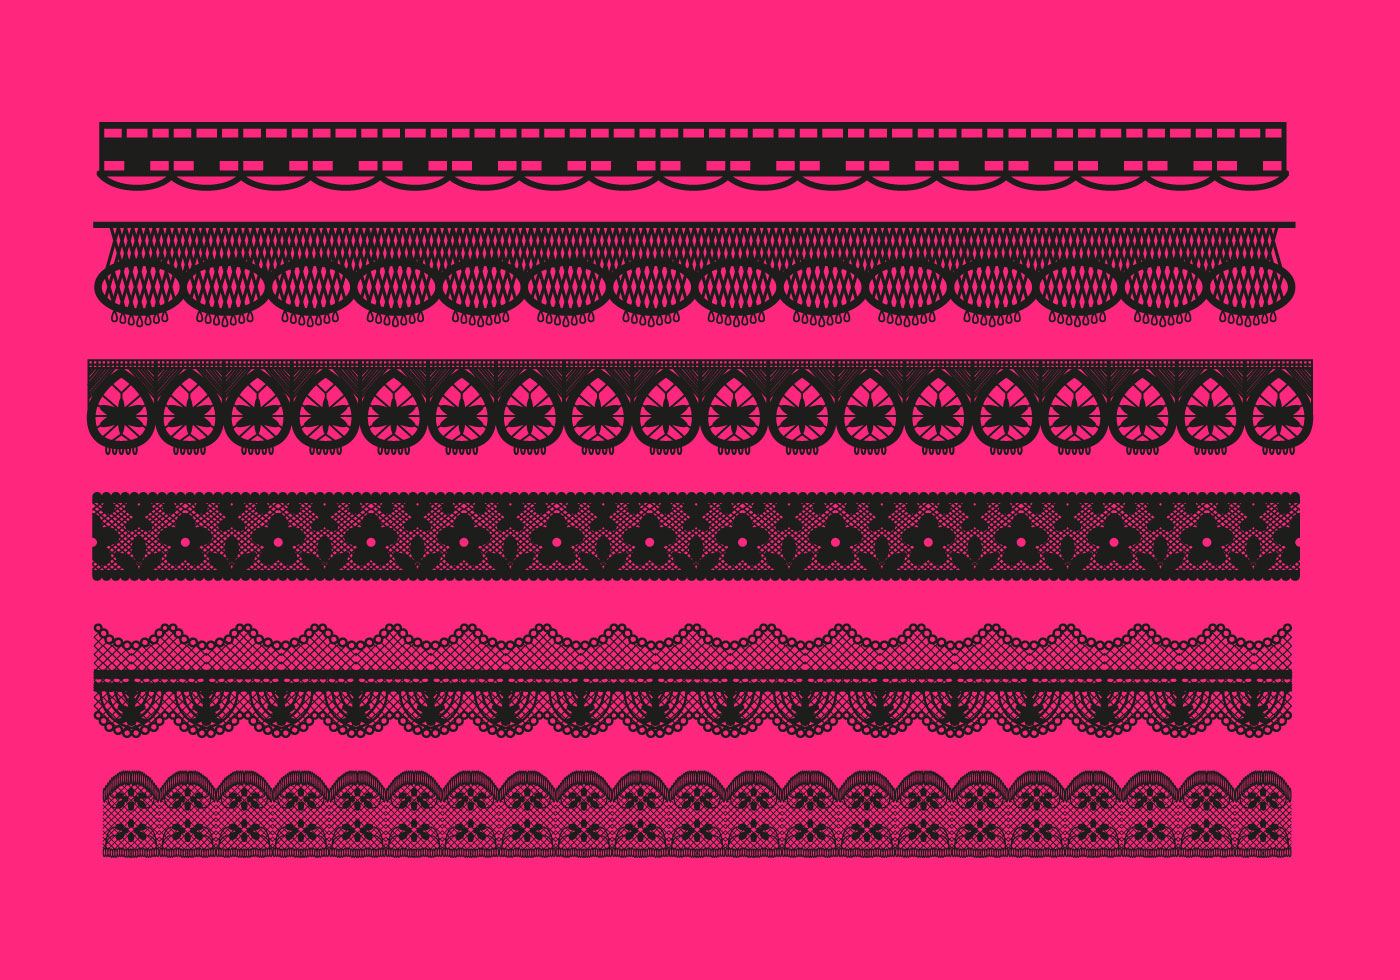 Lace Trim Patterns Vector - Download Free Vector Art ...